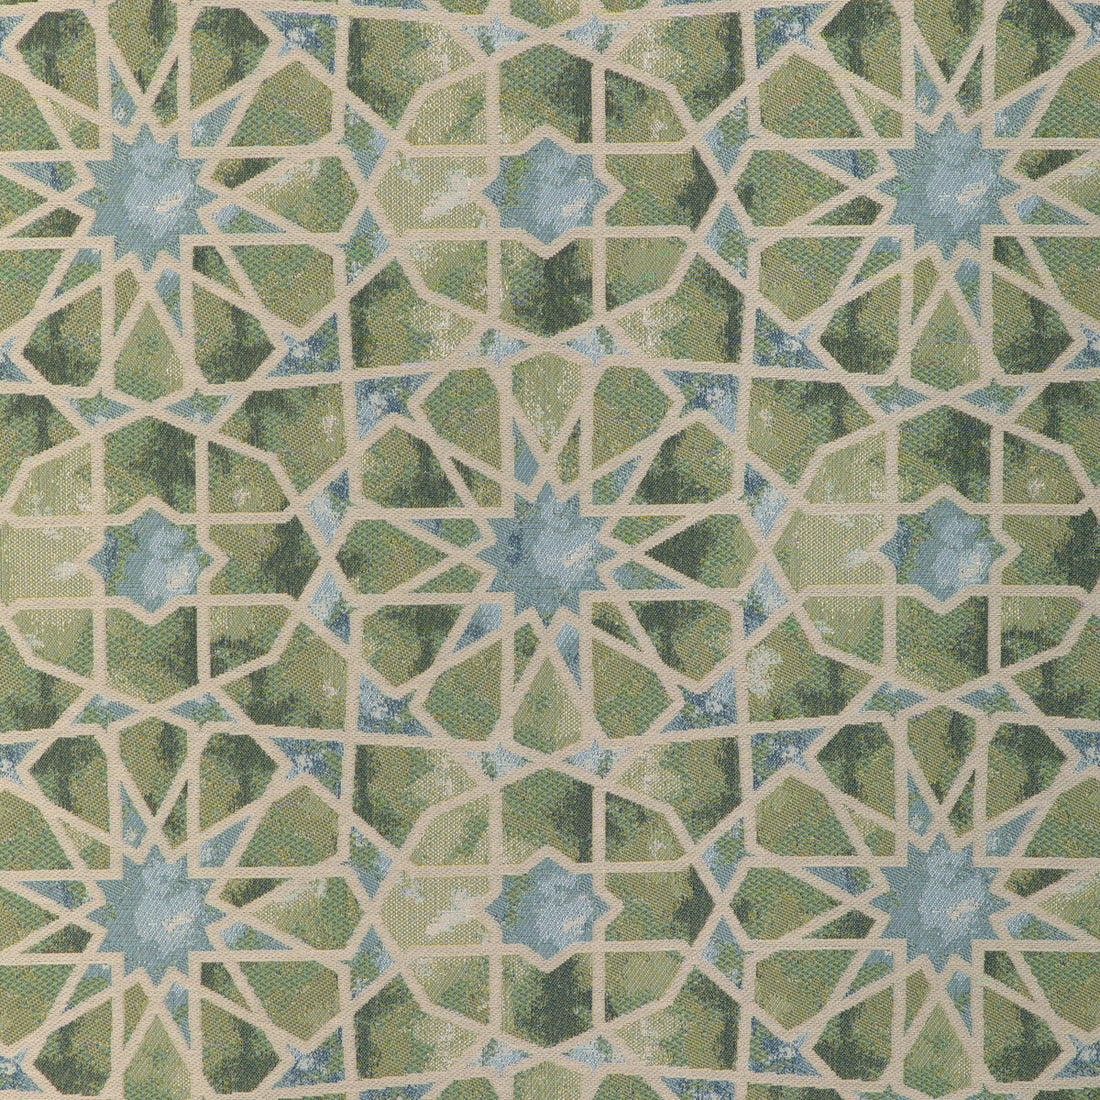 Stoneglow fabric in seaglass color - pattern 37074.153.0 - by Kravet Contract in the Chesapeake collection